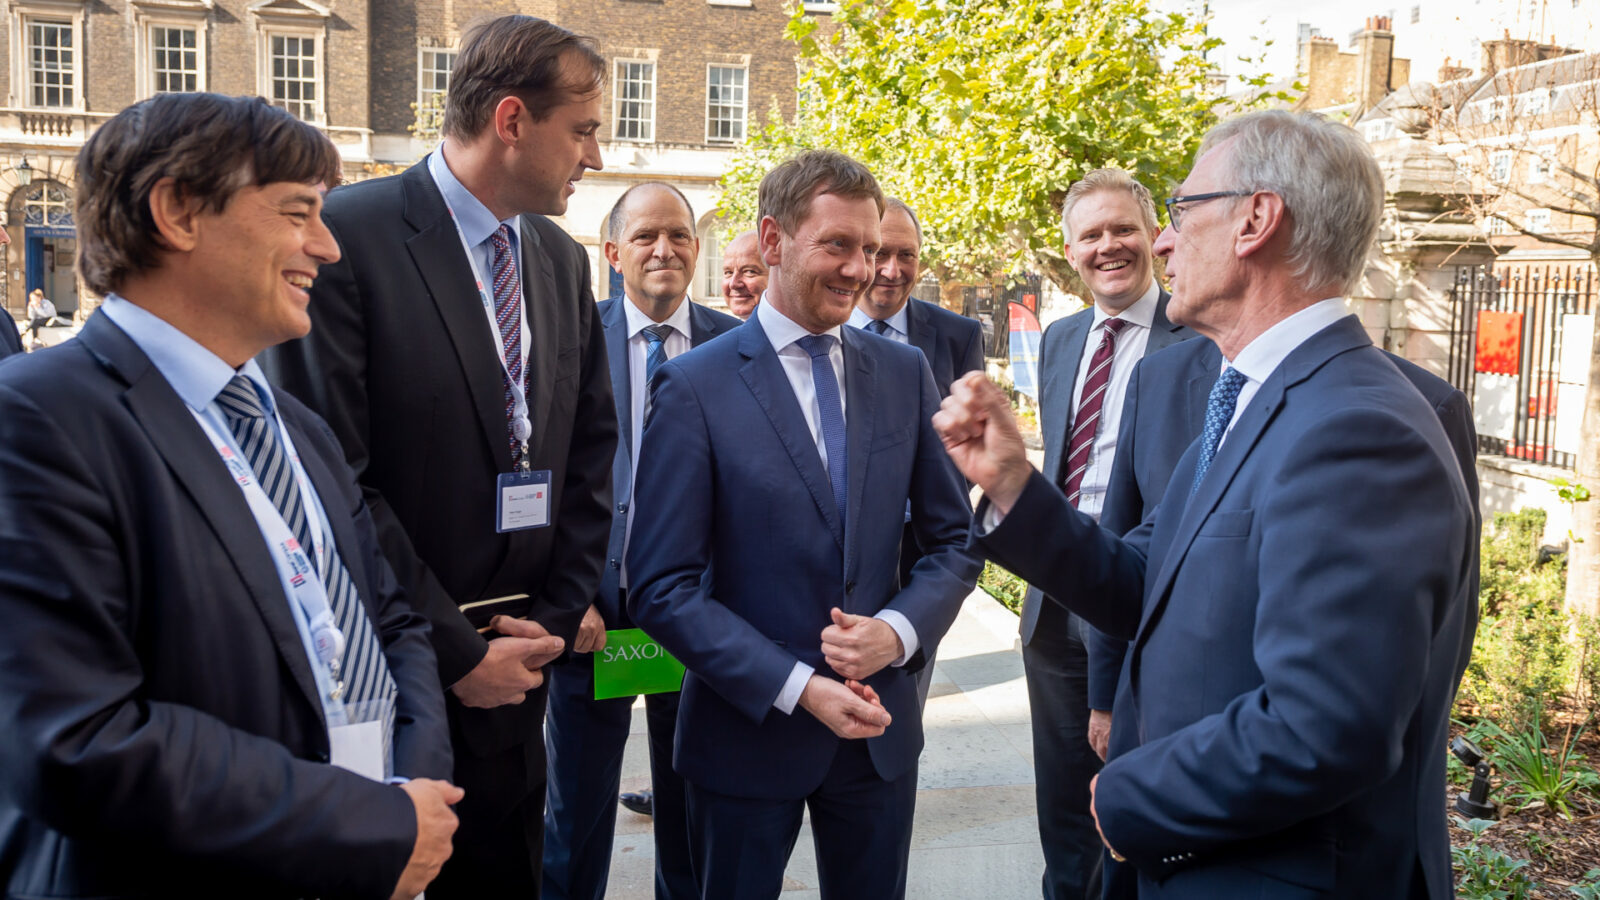 Minister-President of Saxony visits transCampus at KCL